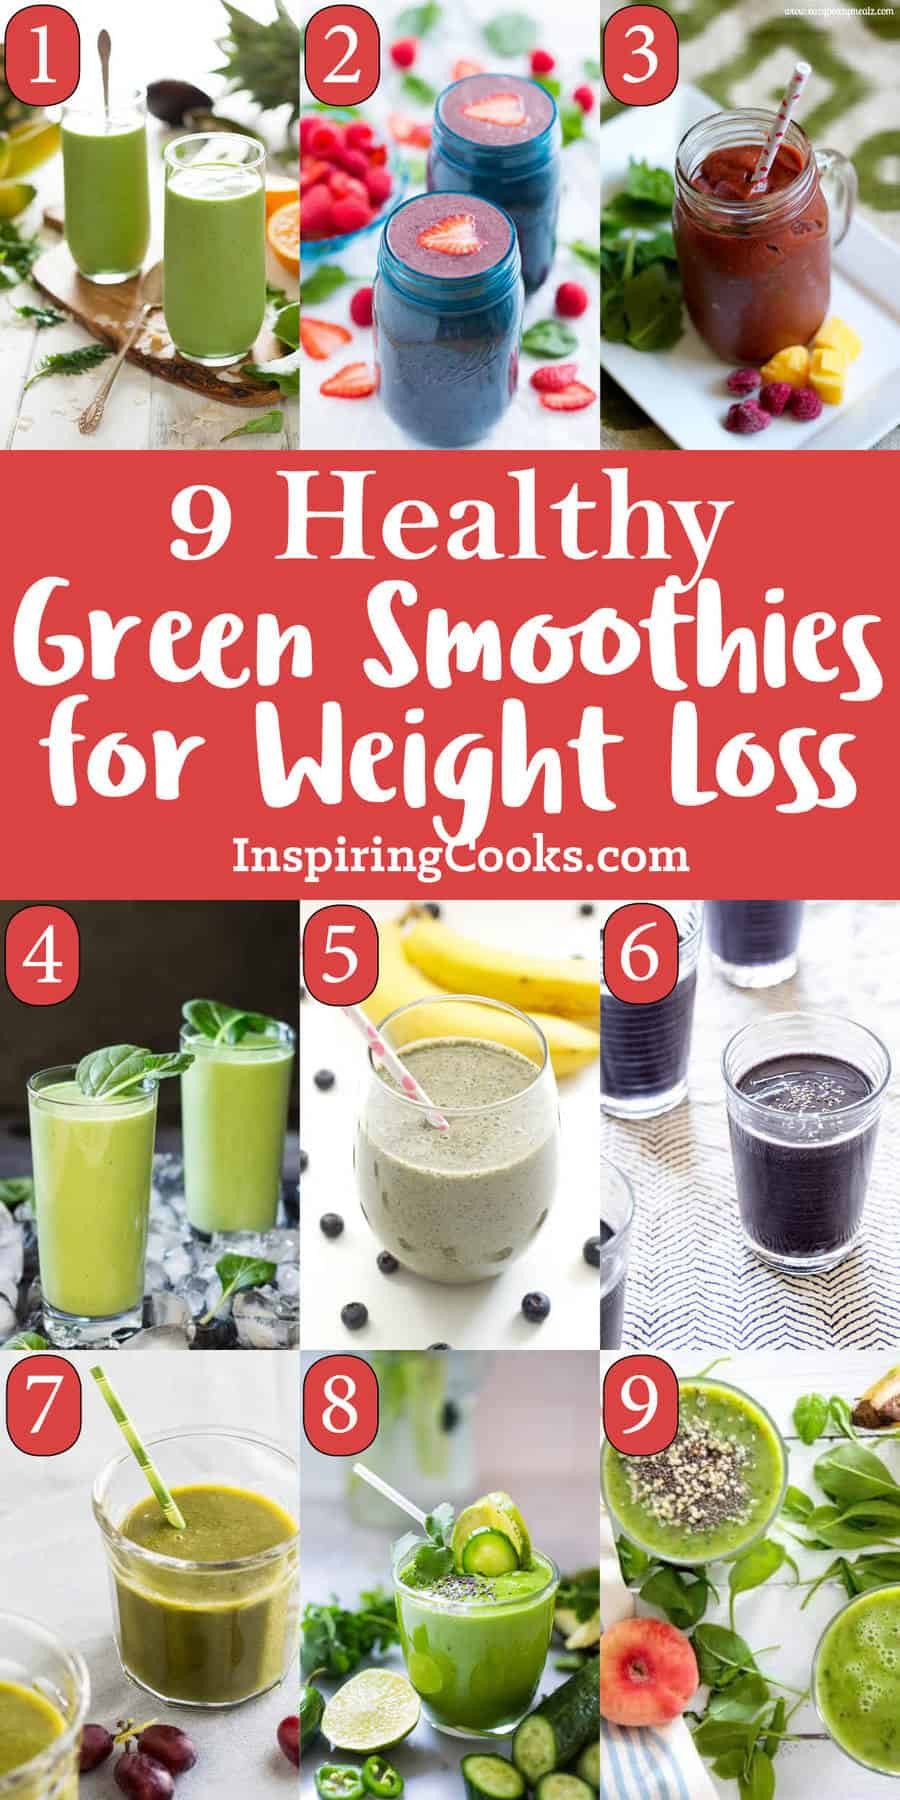 Best Healthy Smoothies
 The Best 9 Healthy Green Smoothies for Weight Loss Recipes